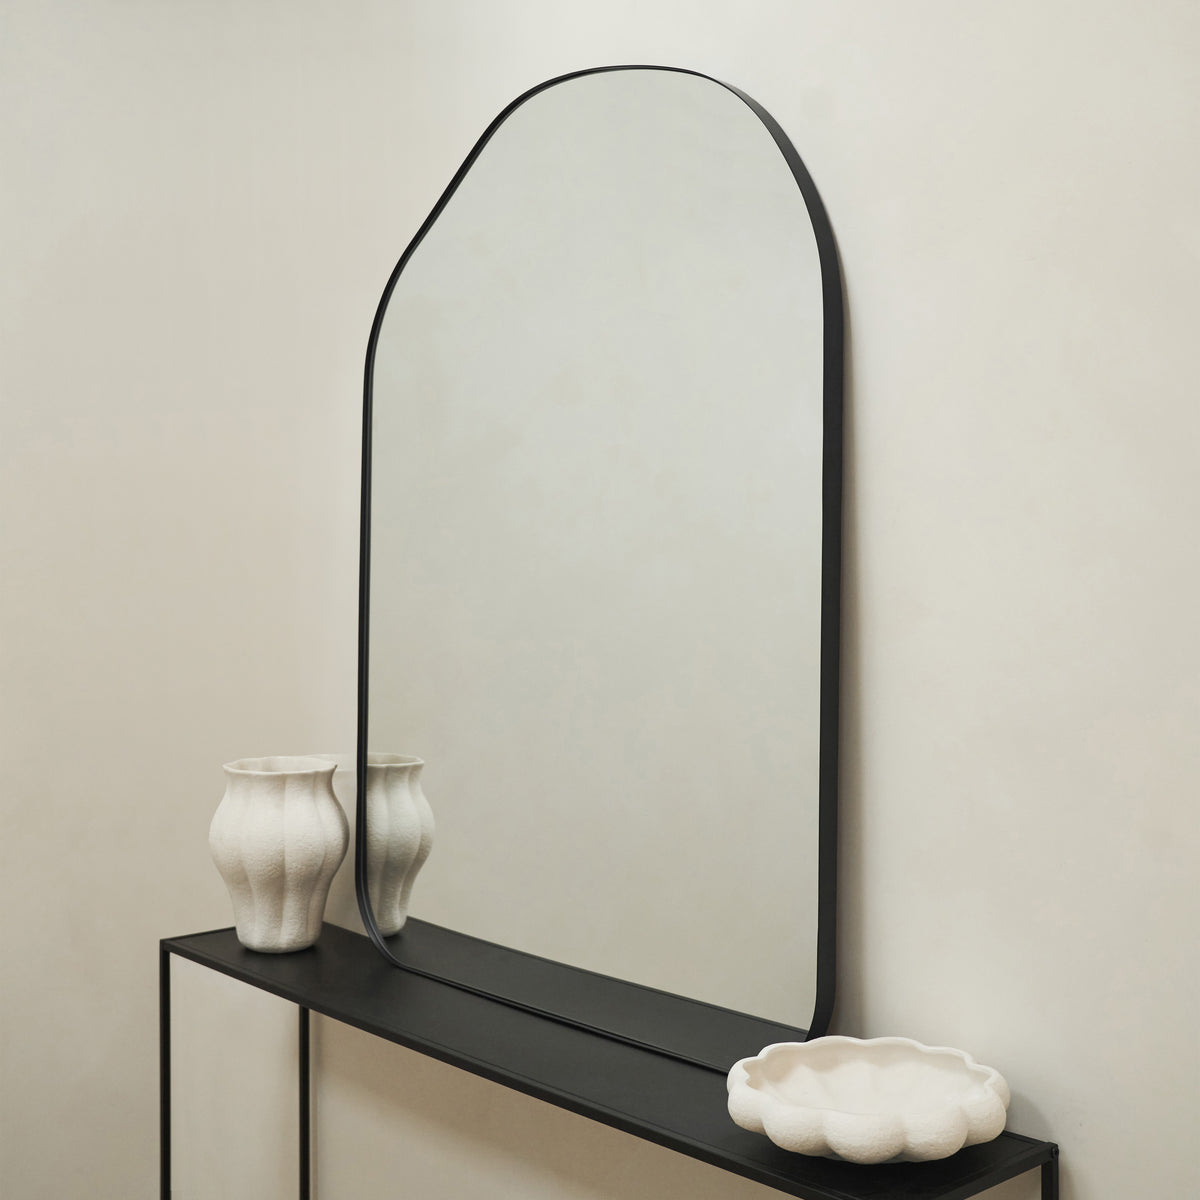 Large Irregular Arched Black Metal Wall Mirror on console table